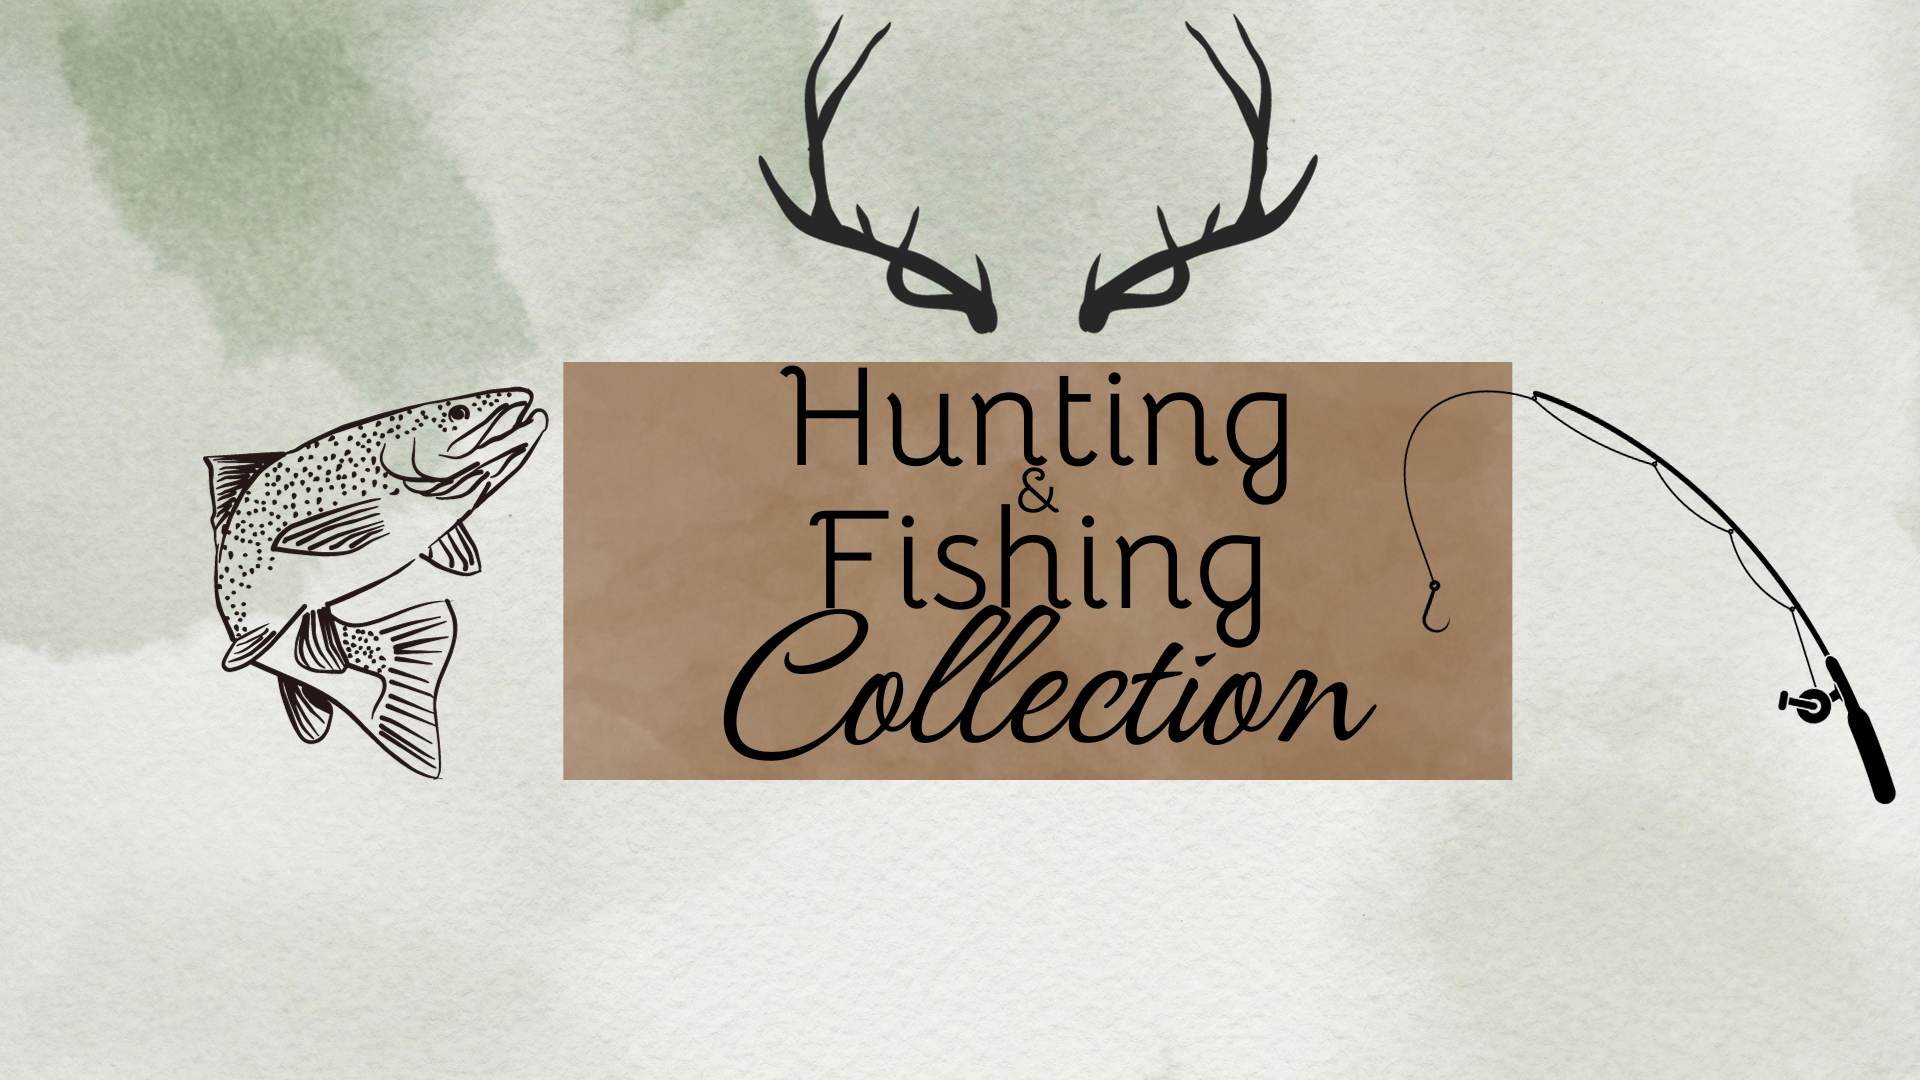 Hunting & Fishing Collection – Cedarburg Threads